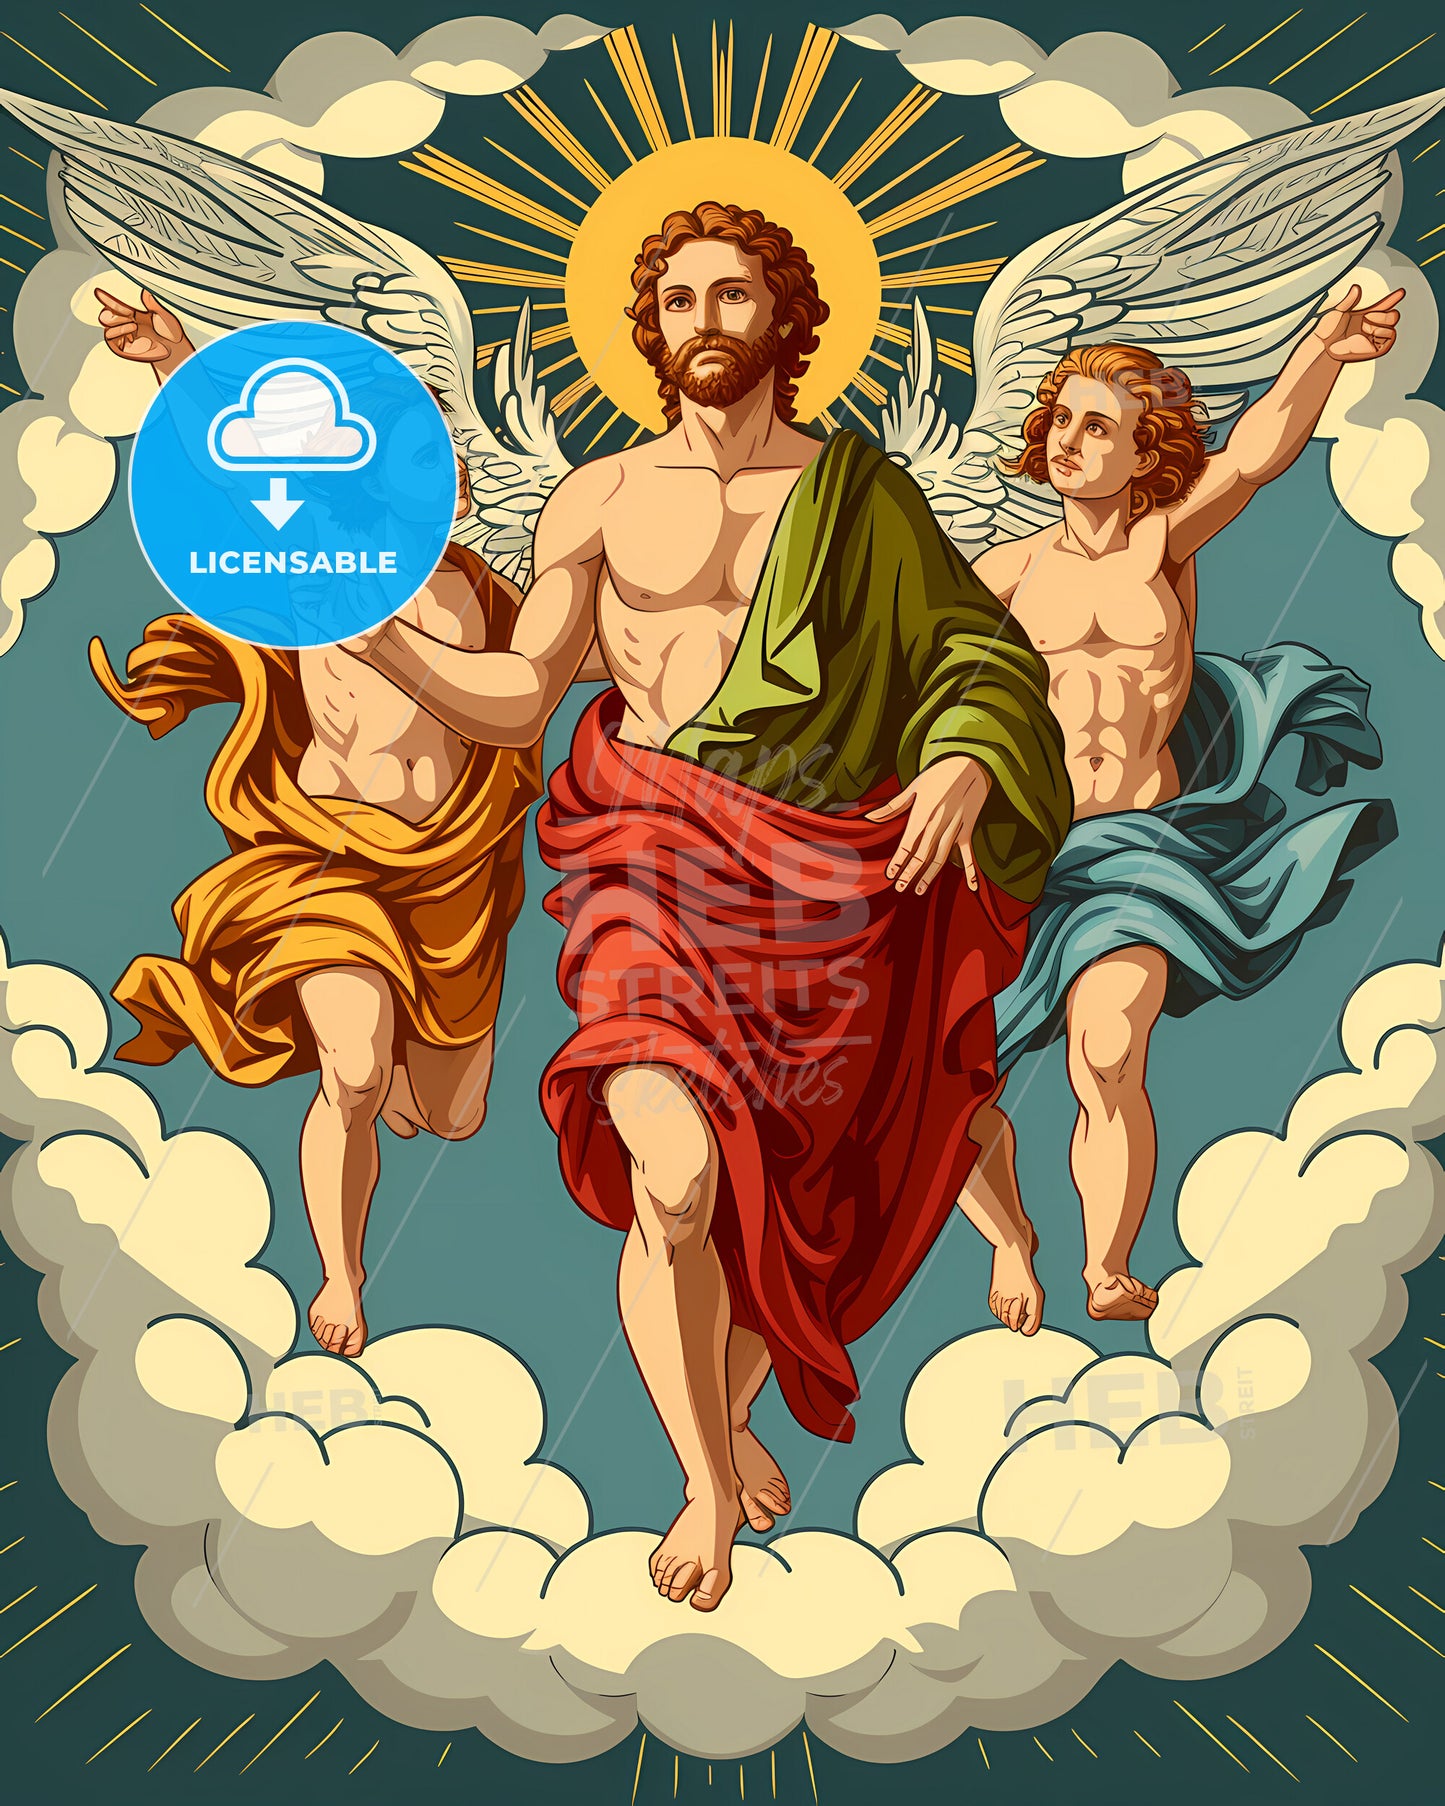 Group Of The Three Archangels St - A Painting Of A Man With Two Angels